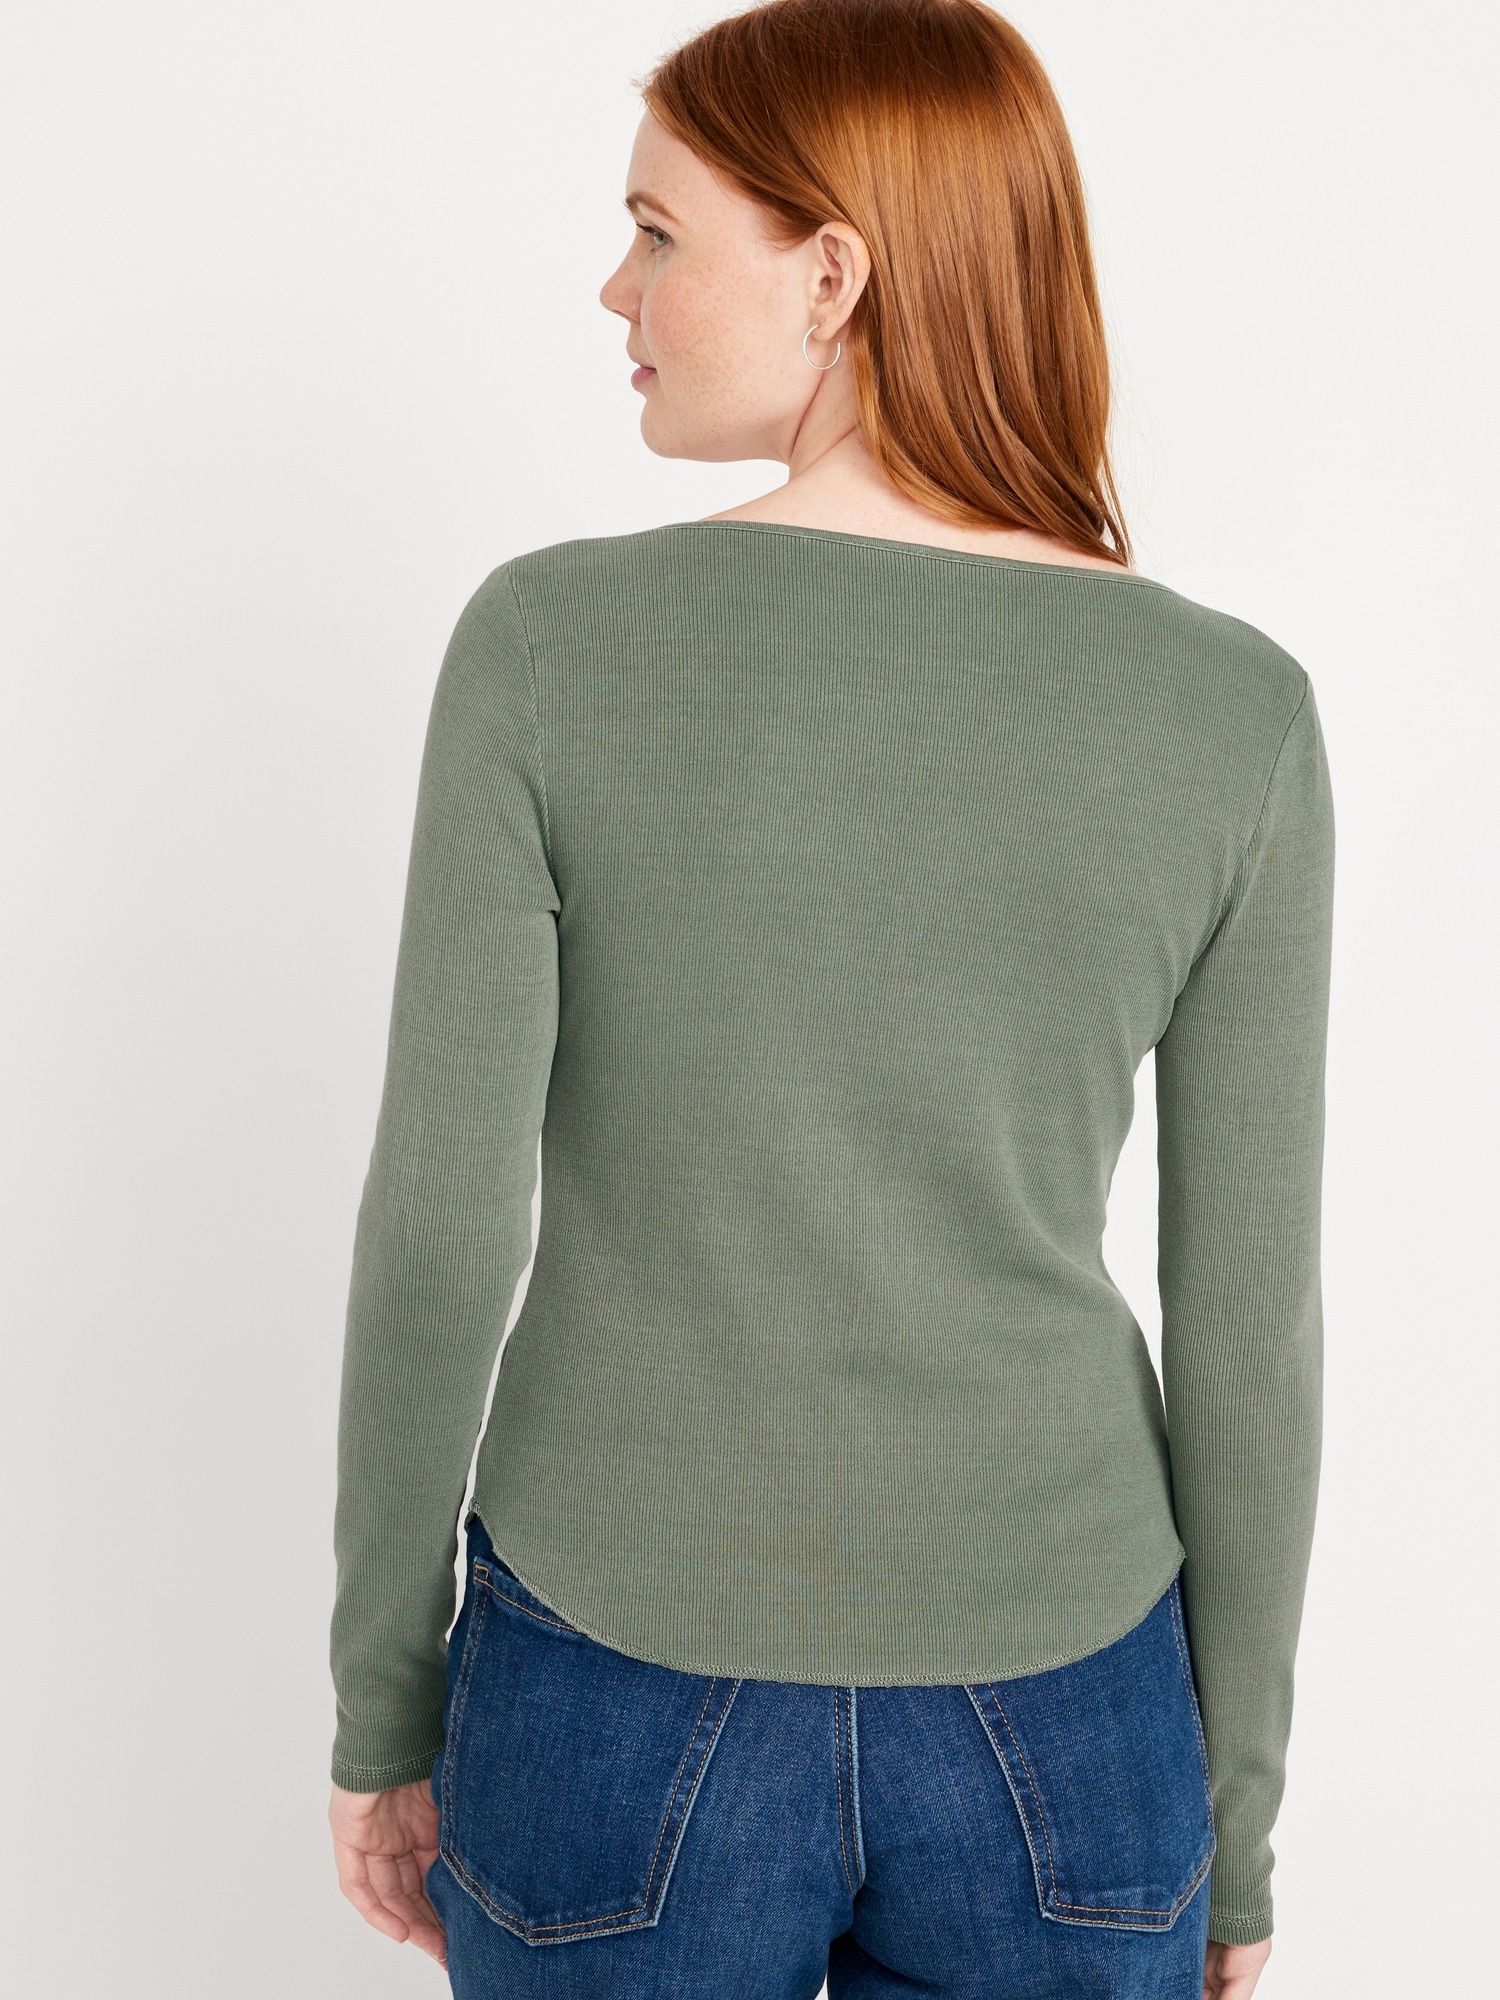 Fitted Long-Sleeve Rib-Knit T-Shirt for Navy Old | Women